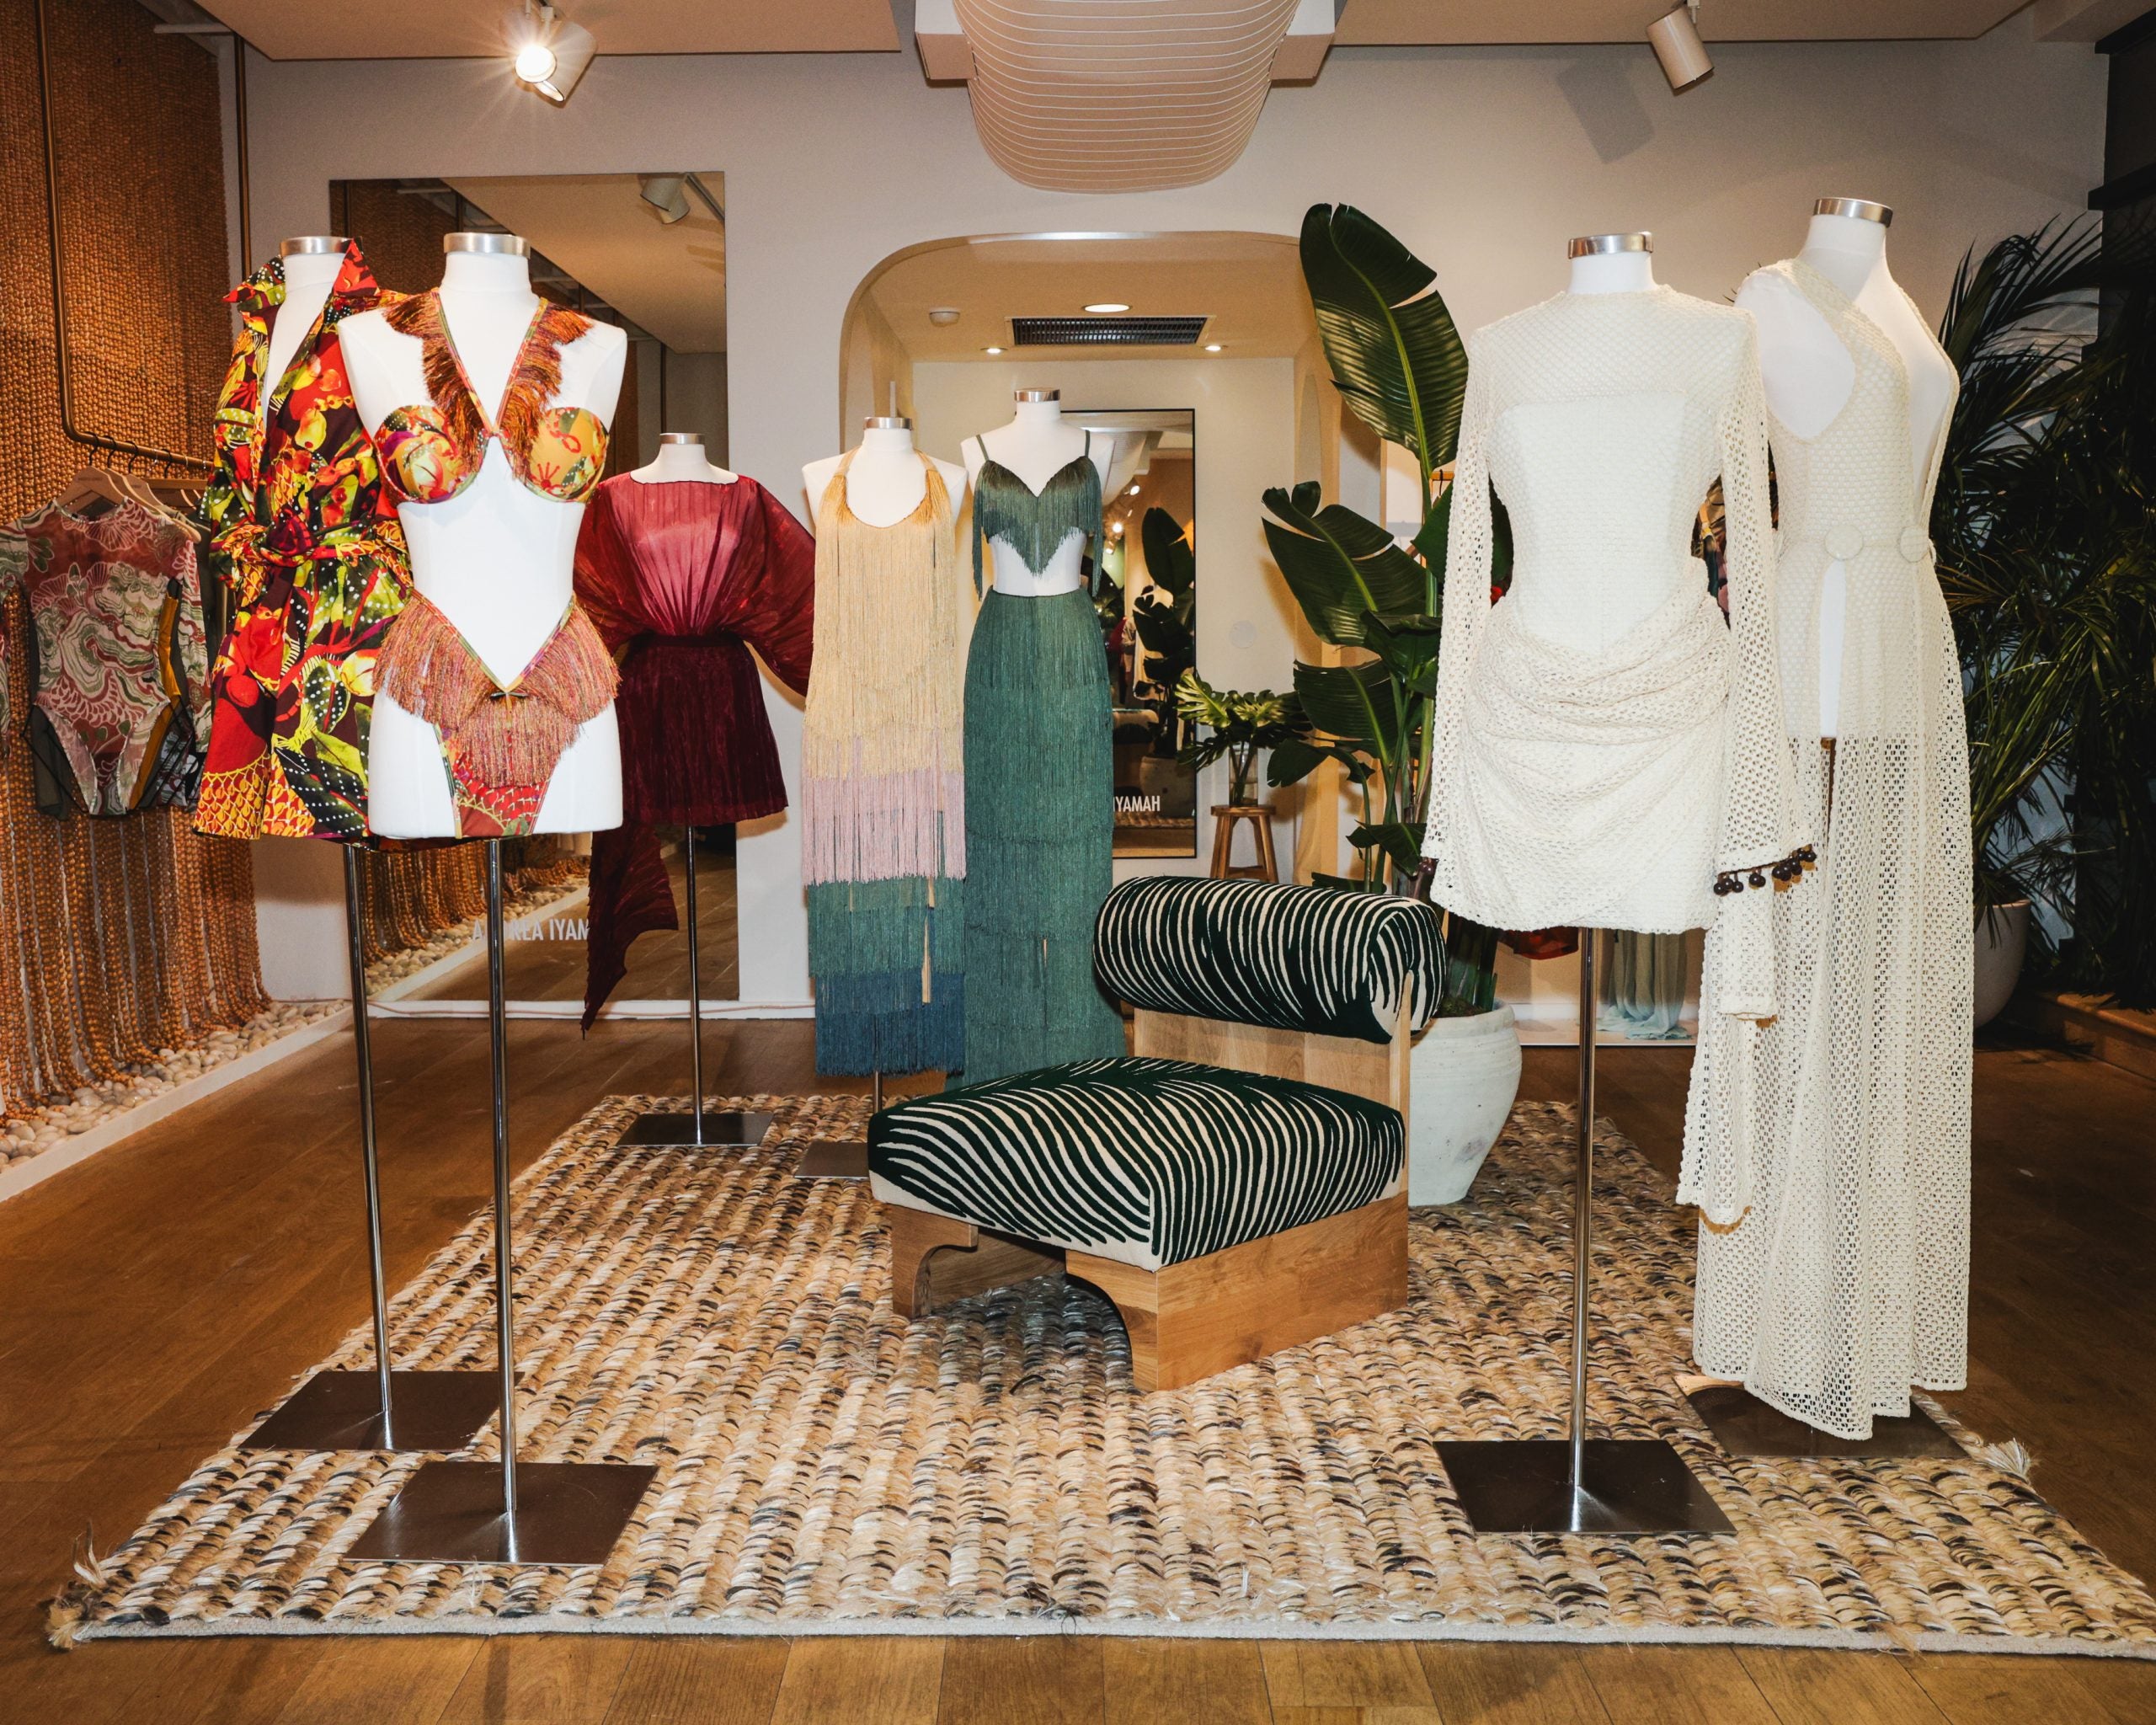 At Andrea Iyamah’s New York Storefront, The Designer Continues Building Her Delightful Legacy